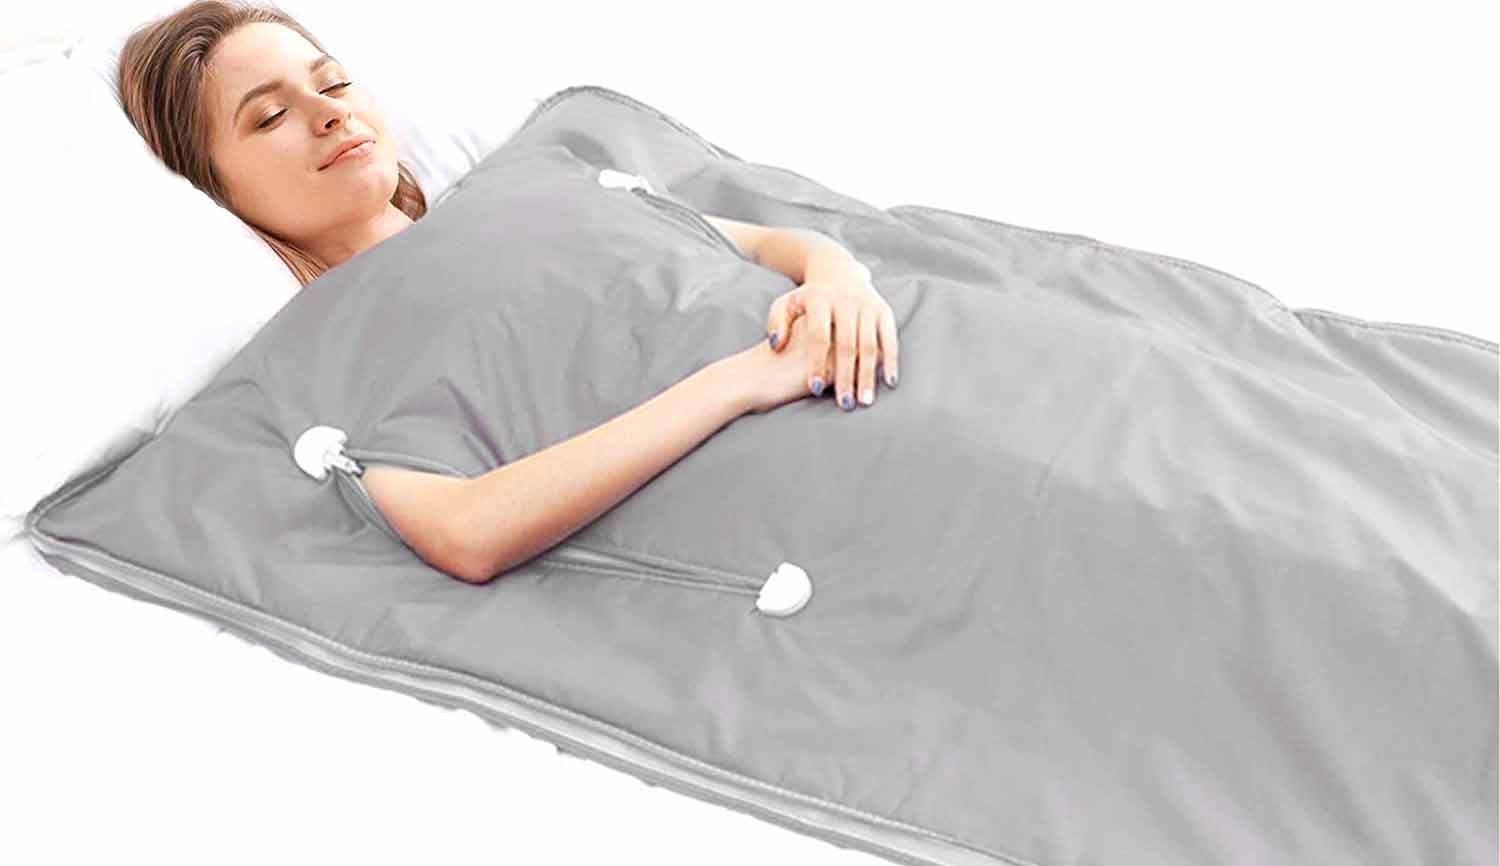 10 Science Based Benefits of Using An Infrared Sauna Blanket